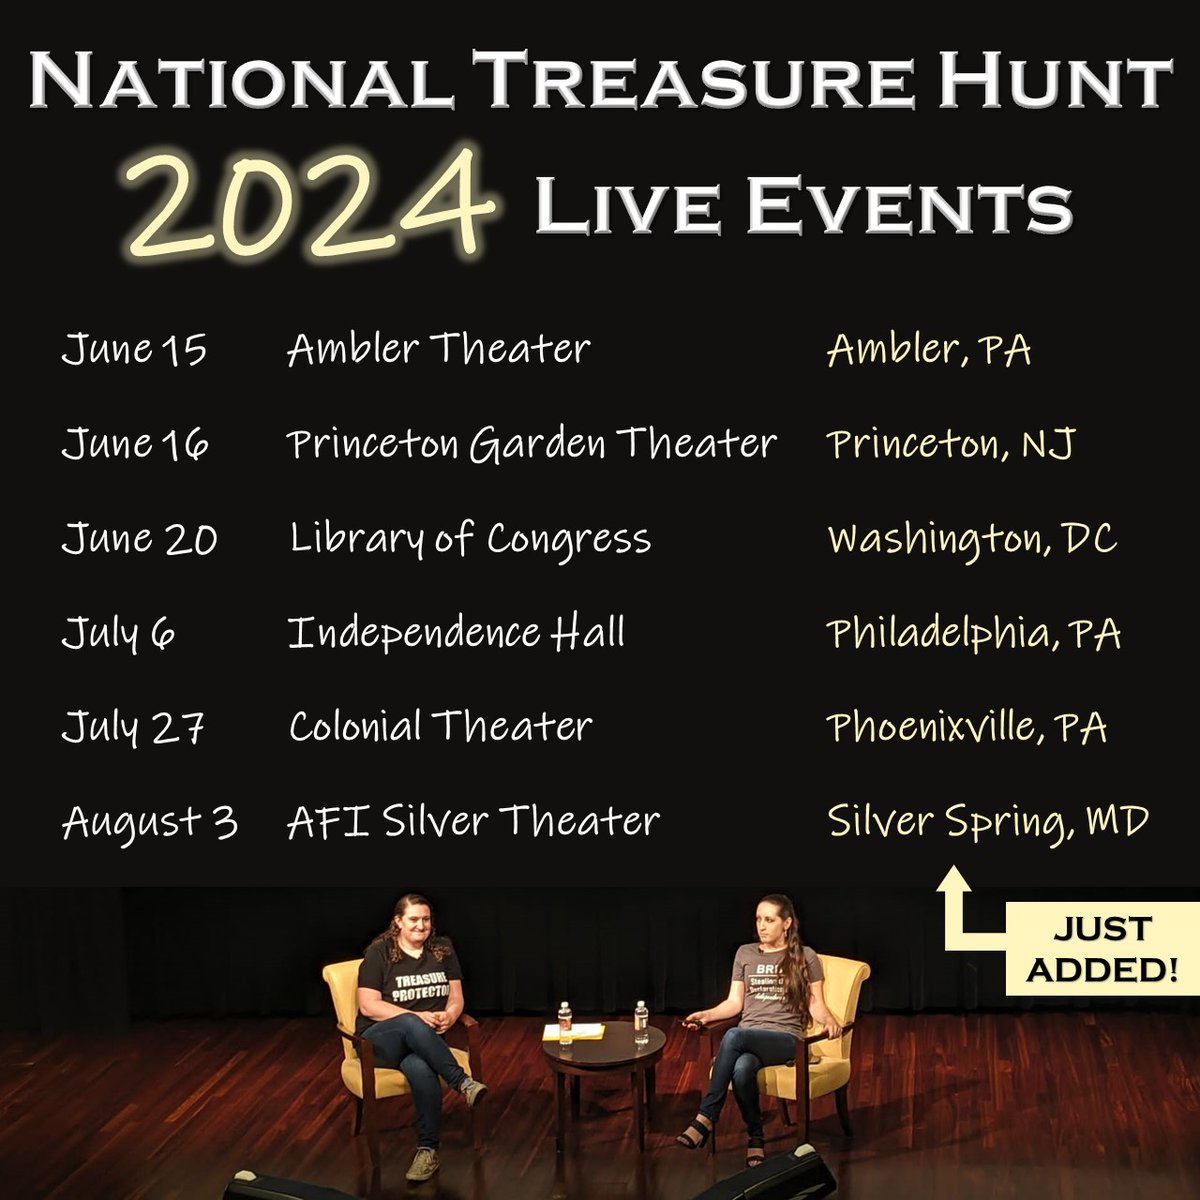 Big news! 📢 We've just added a SIXTH date to our National Treasure Hunt LIVE event series this summer! DMV residents and visitors can join us at @AFISilver on August 3 for a #NationalTreasure screening, preceded by National Treasure trivia and followed by a book signing.